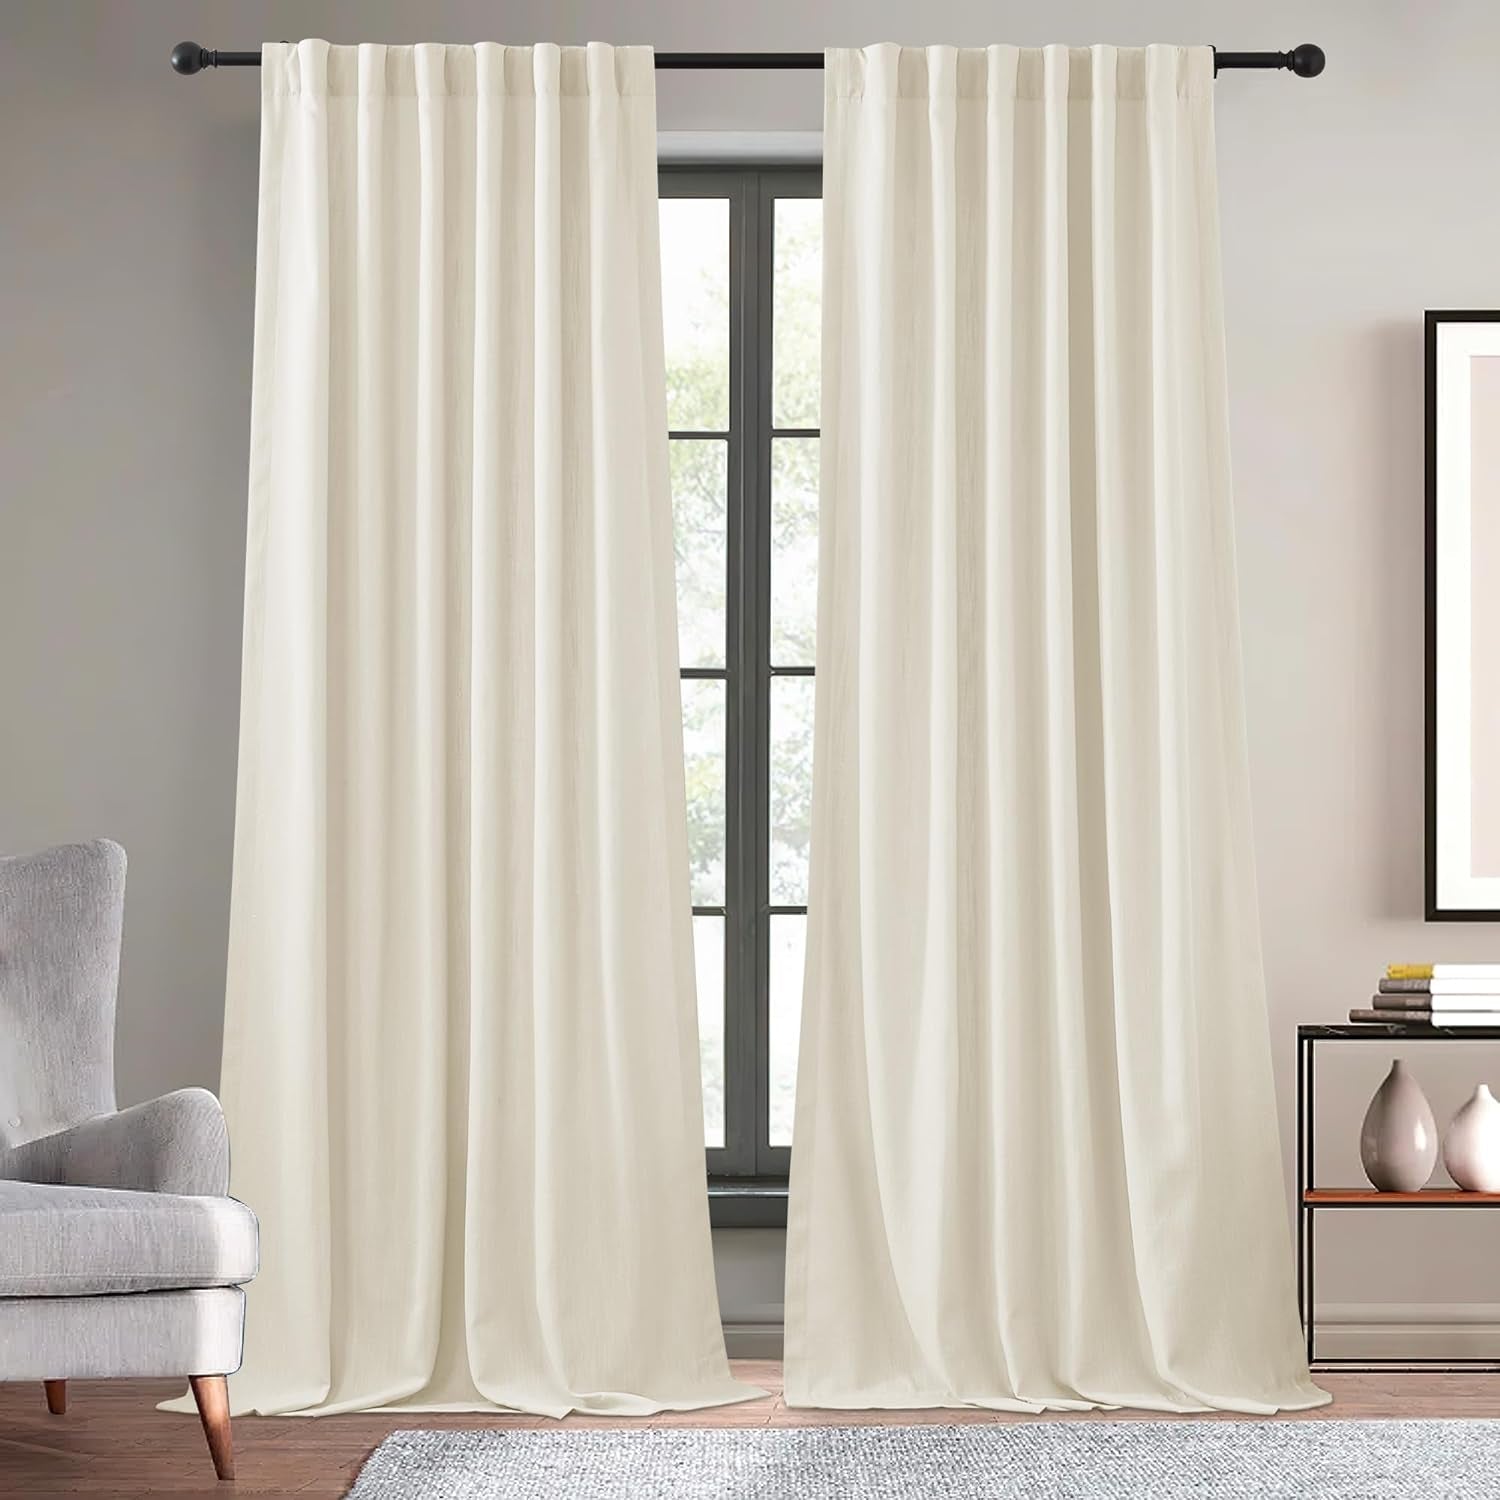 KGORGE Thick Faux Linen Weave Textured Curtains for Bedroom Light Filtering Semi Sheer Curtains Farmhouse Decor Pinch Pleated Window Drapes for Living Room, Linen, W 52" X L 96", 2 Pcs  KGORGE   